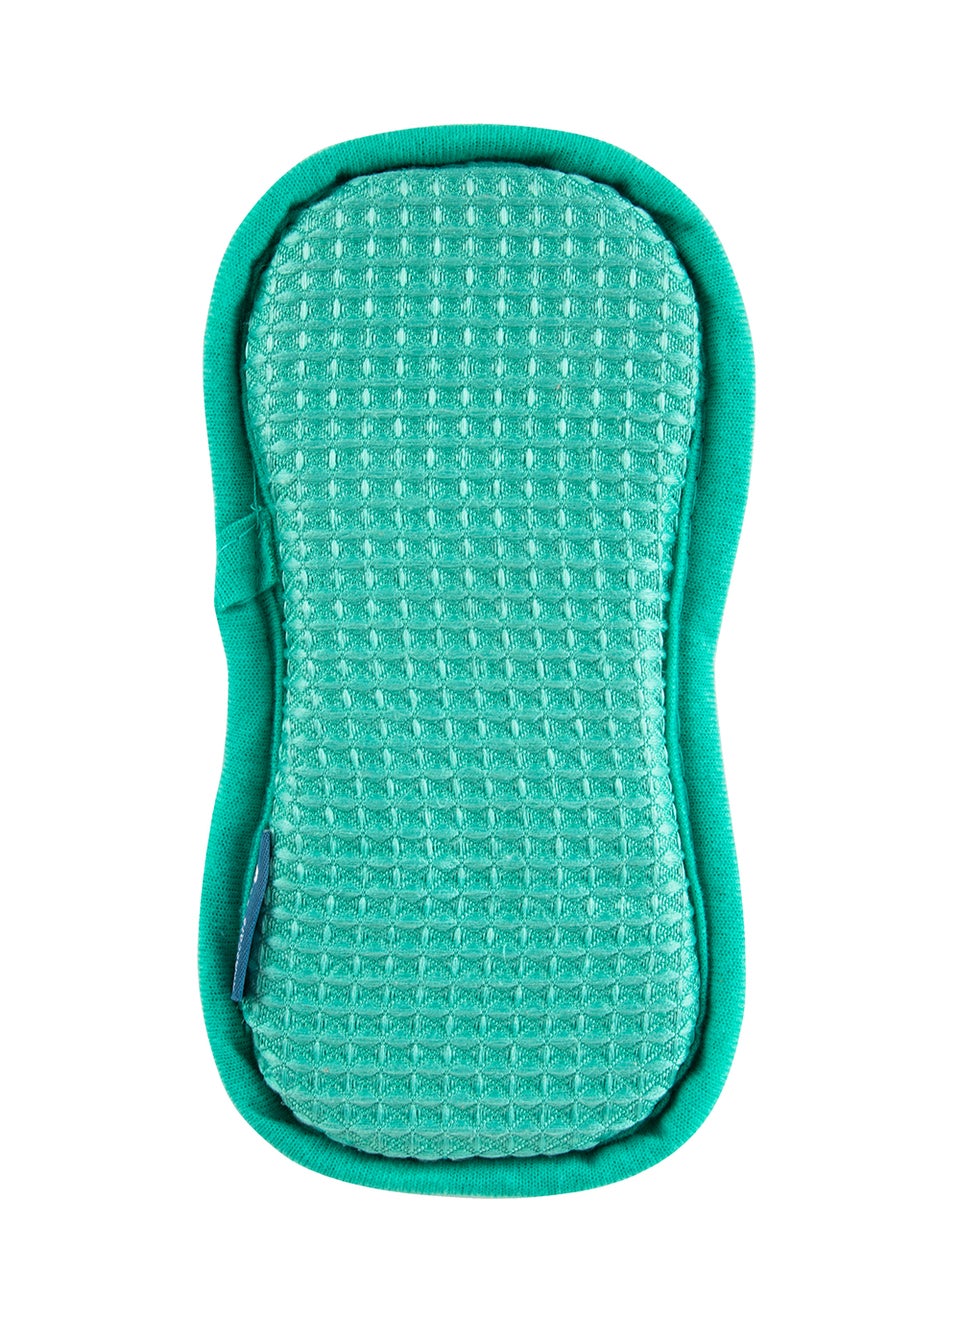 Minky Cloth Anti-Bacterial Cleaning Pad (19cm x 9.5cm)